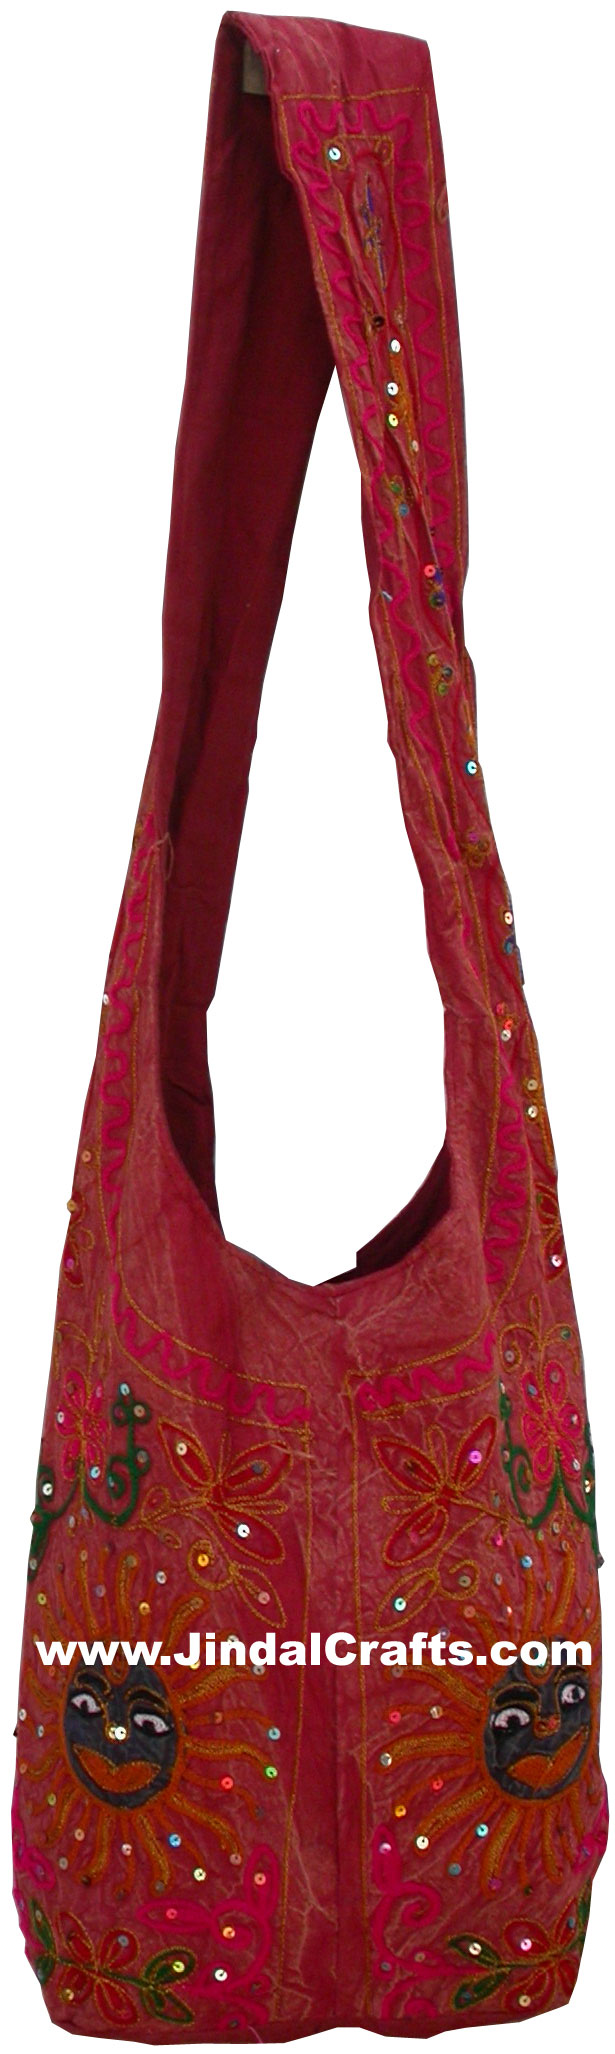 Colourful Hand Embroidered Sun Handbag from India 100 % Cotton Fabric Art